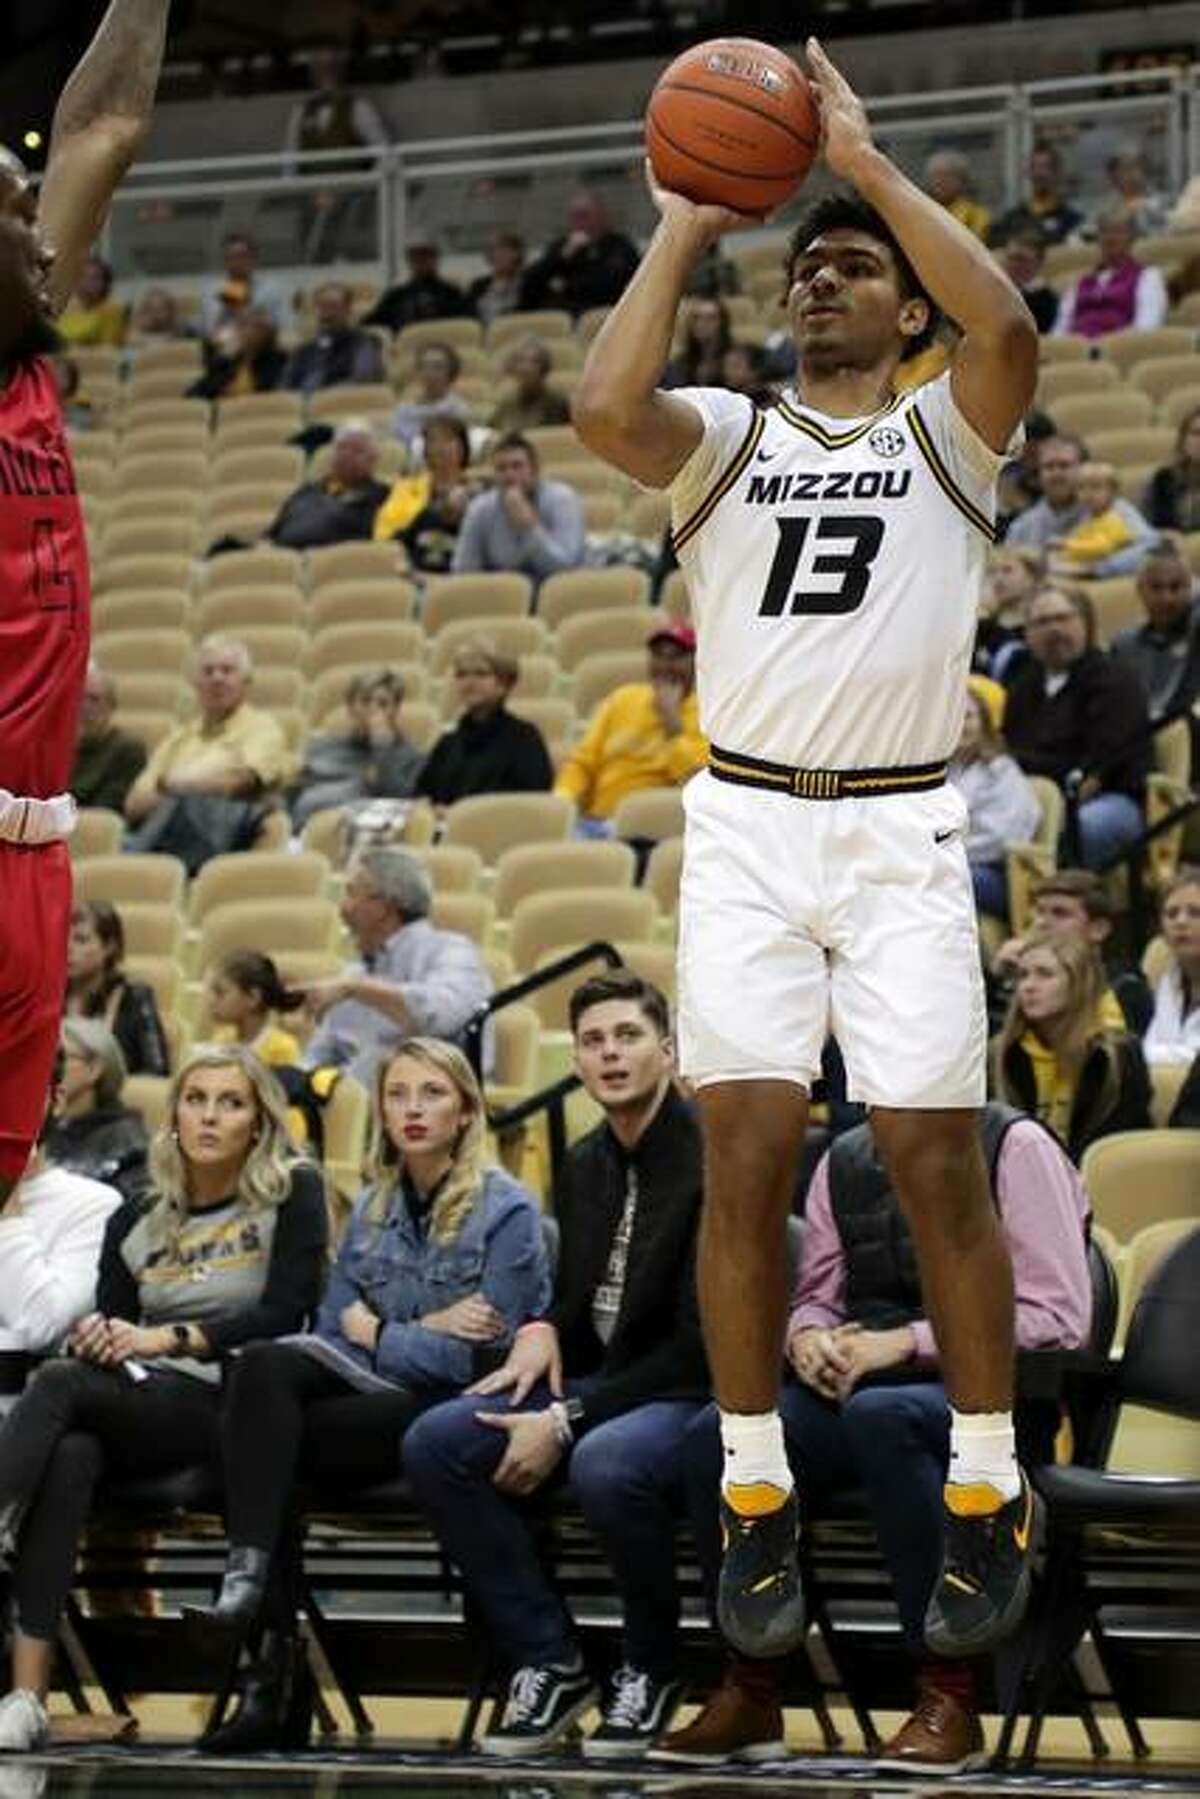 Missouri junior Mark Smith puts up a jump shot during an 80-56 exhibition win over Central Missouri on Nov. 1 at Mizzou Arena.